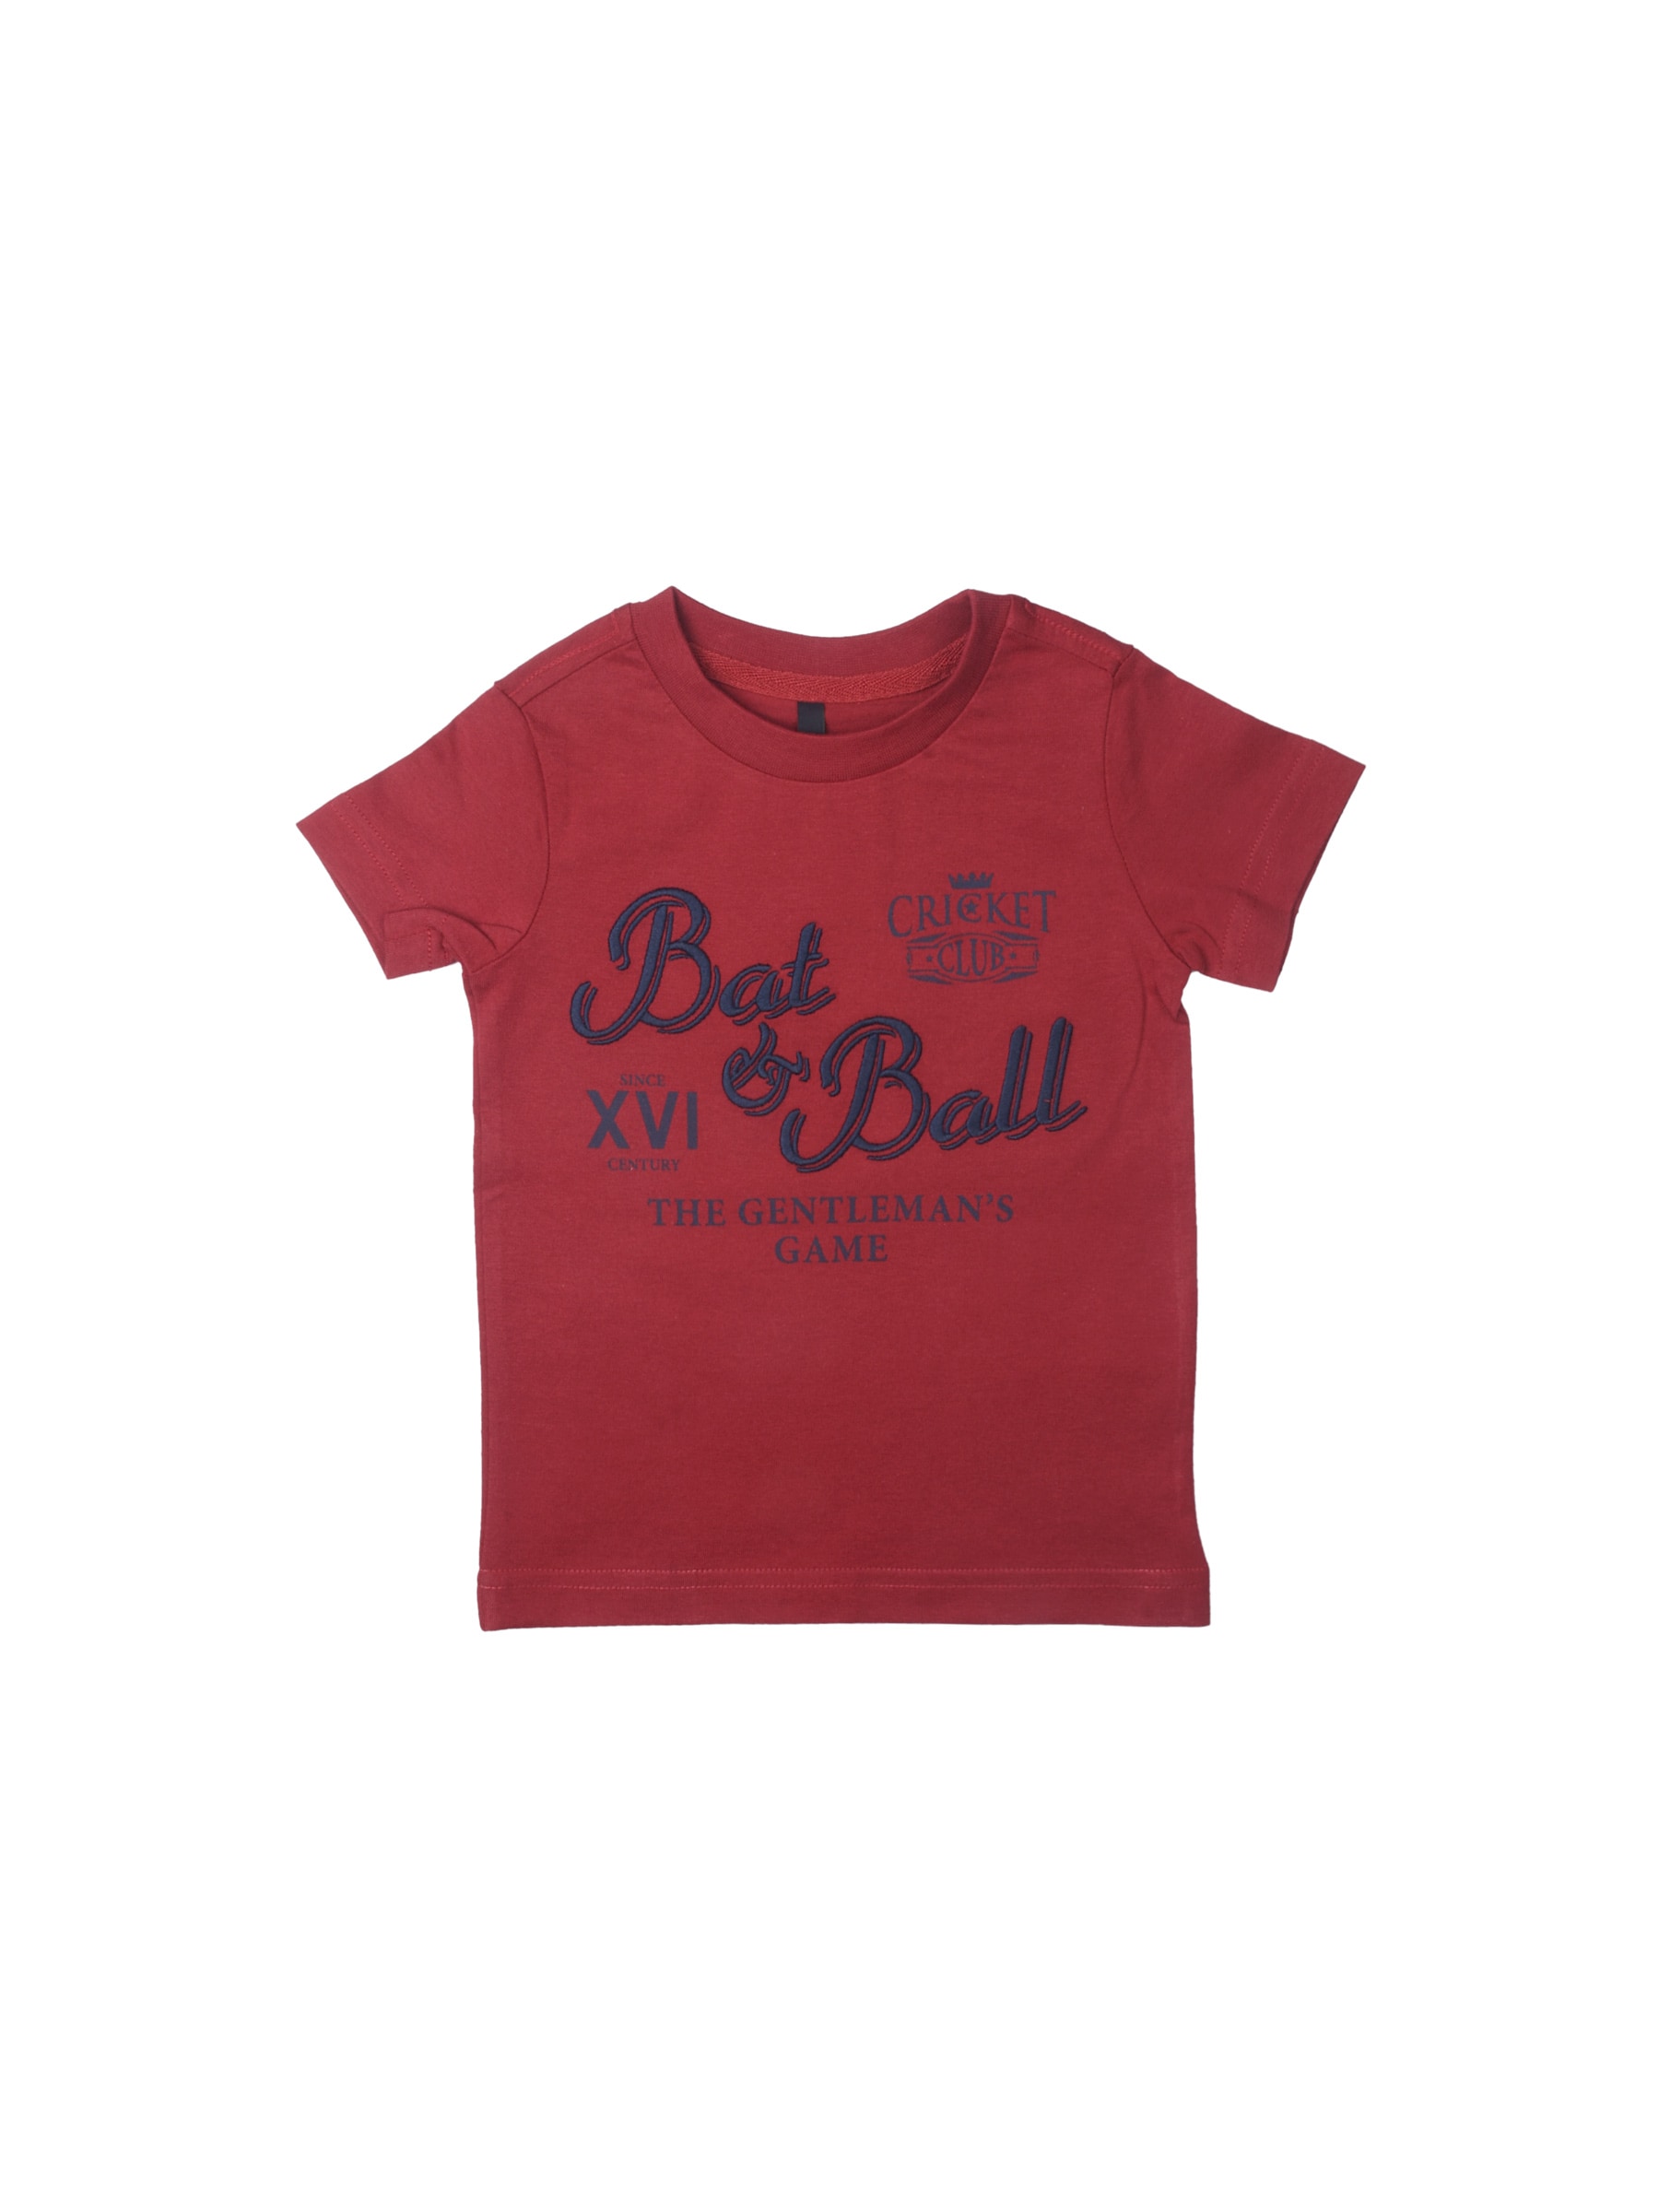 United Colors of Benetton Boys Printed Red T-shirt